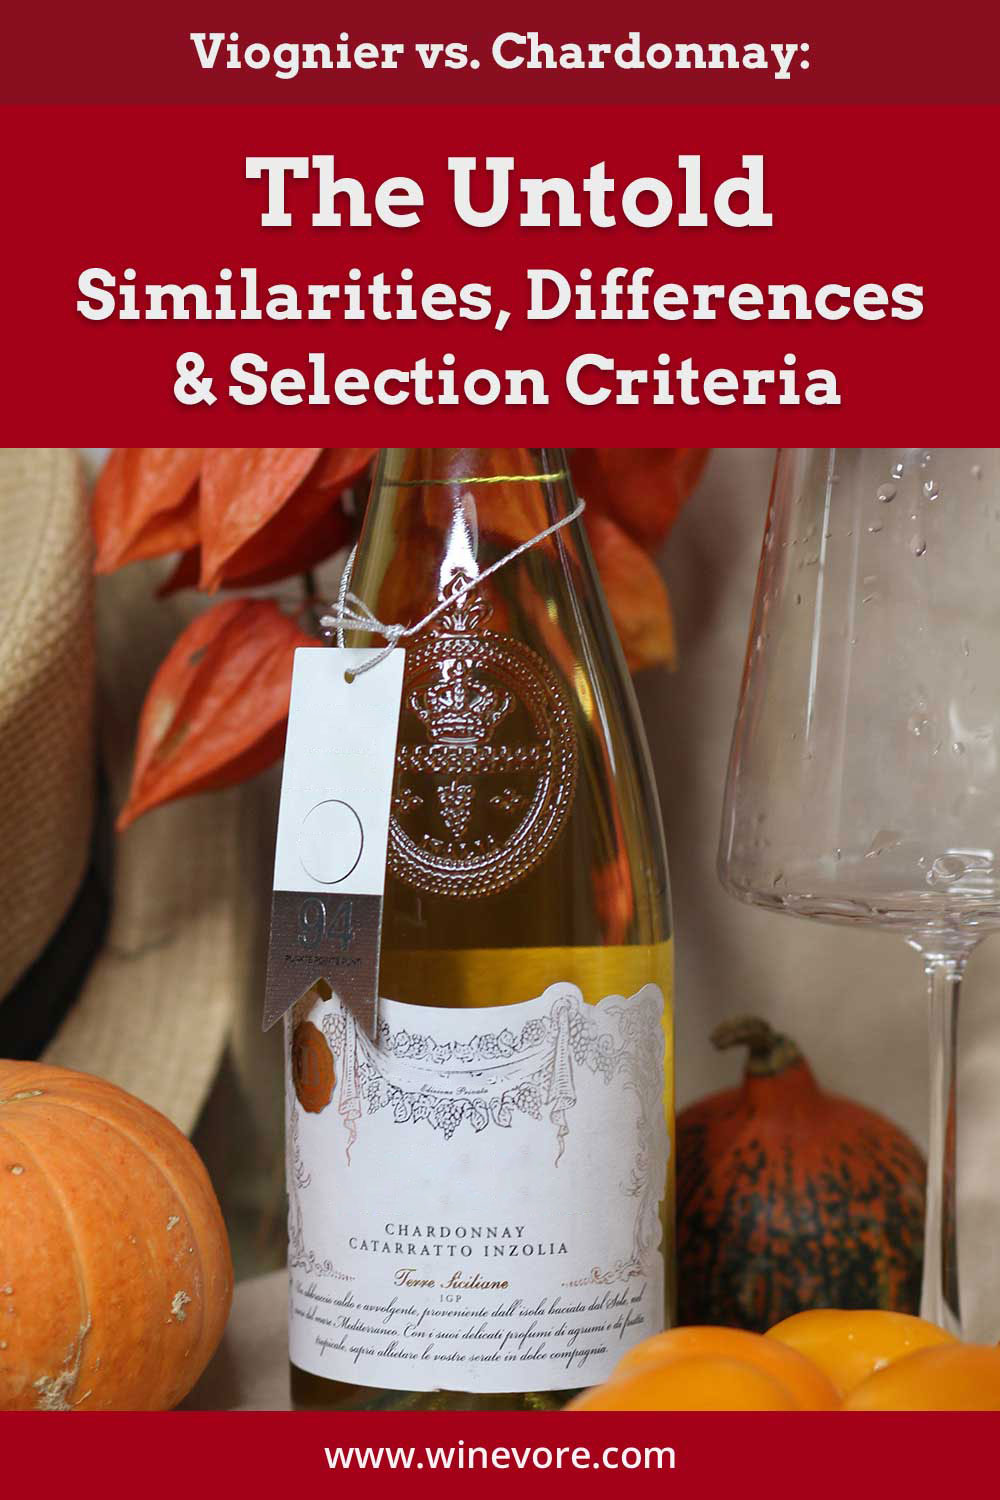 A wine bottle with a tag on it - Viognier vs. Chardonnay: Similarities, Differences & Selection Criteria